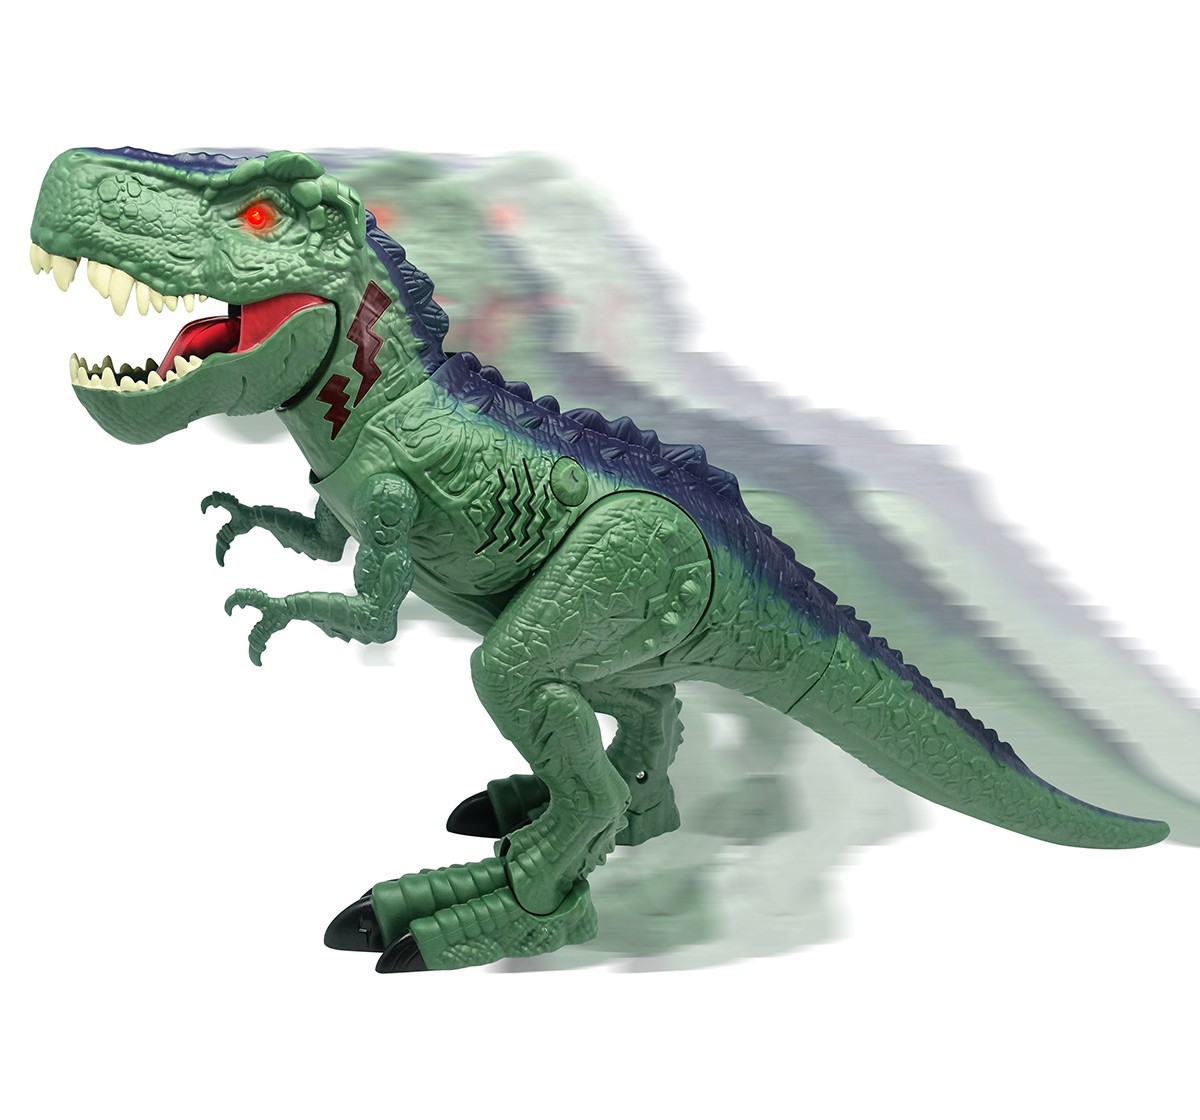 Dragon I Chomping and Walking T-Rex Electronic Dinosaur Toys for Kids 3Y+, Multicolour